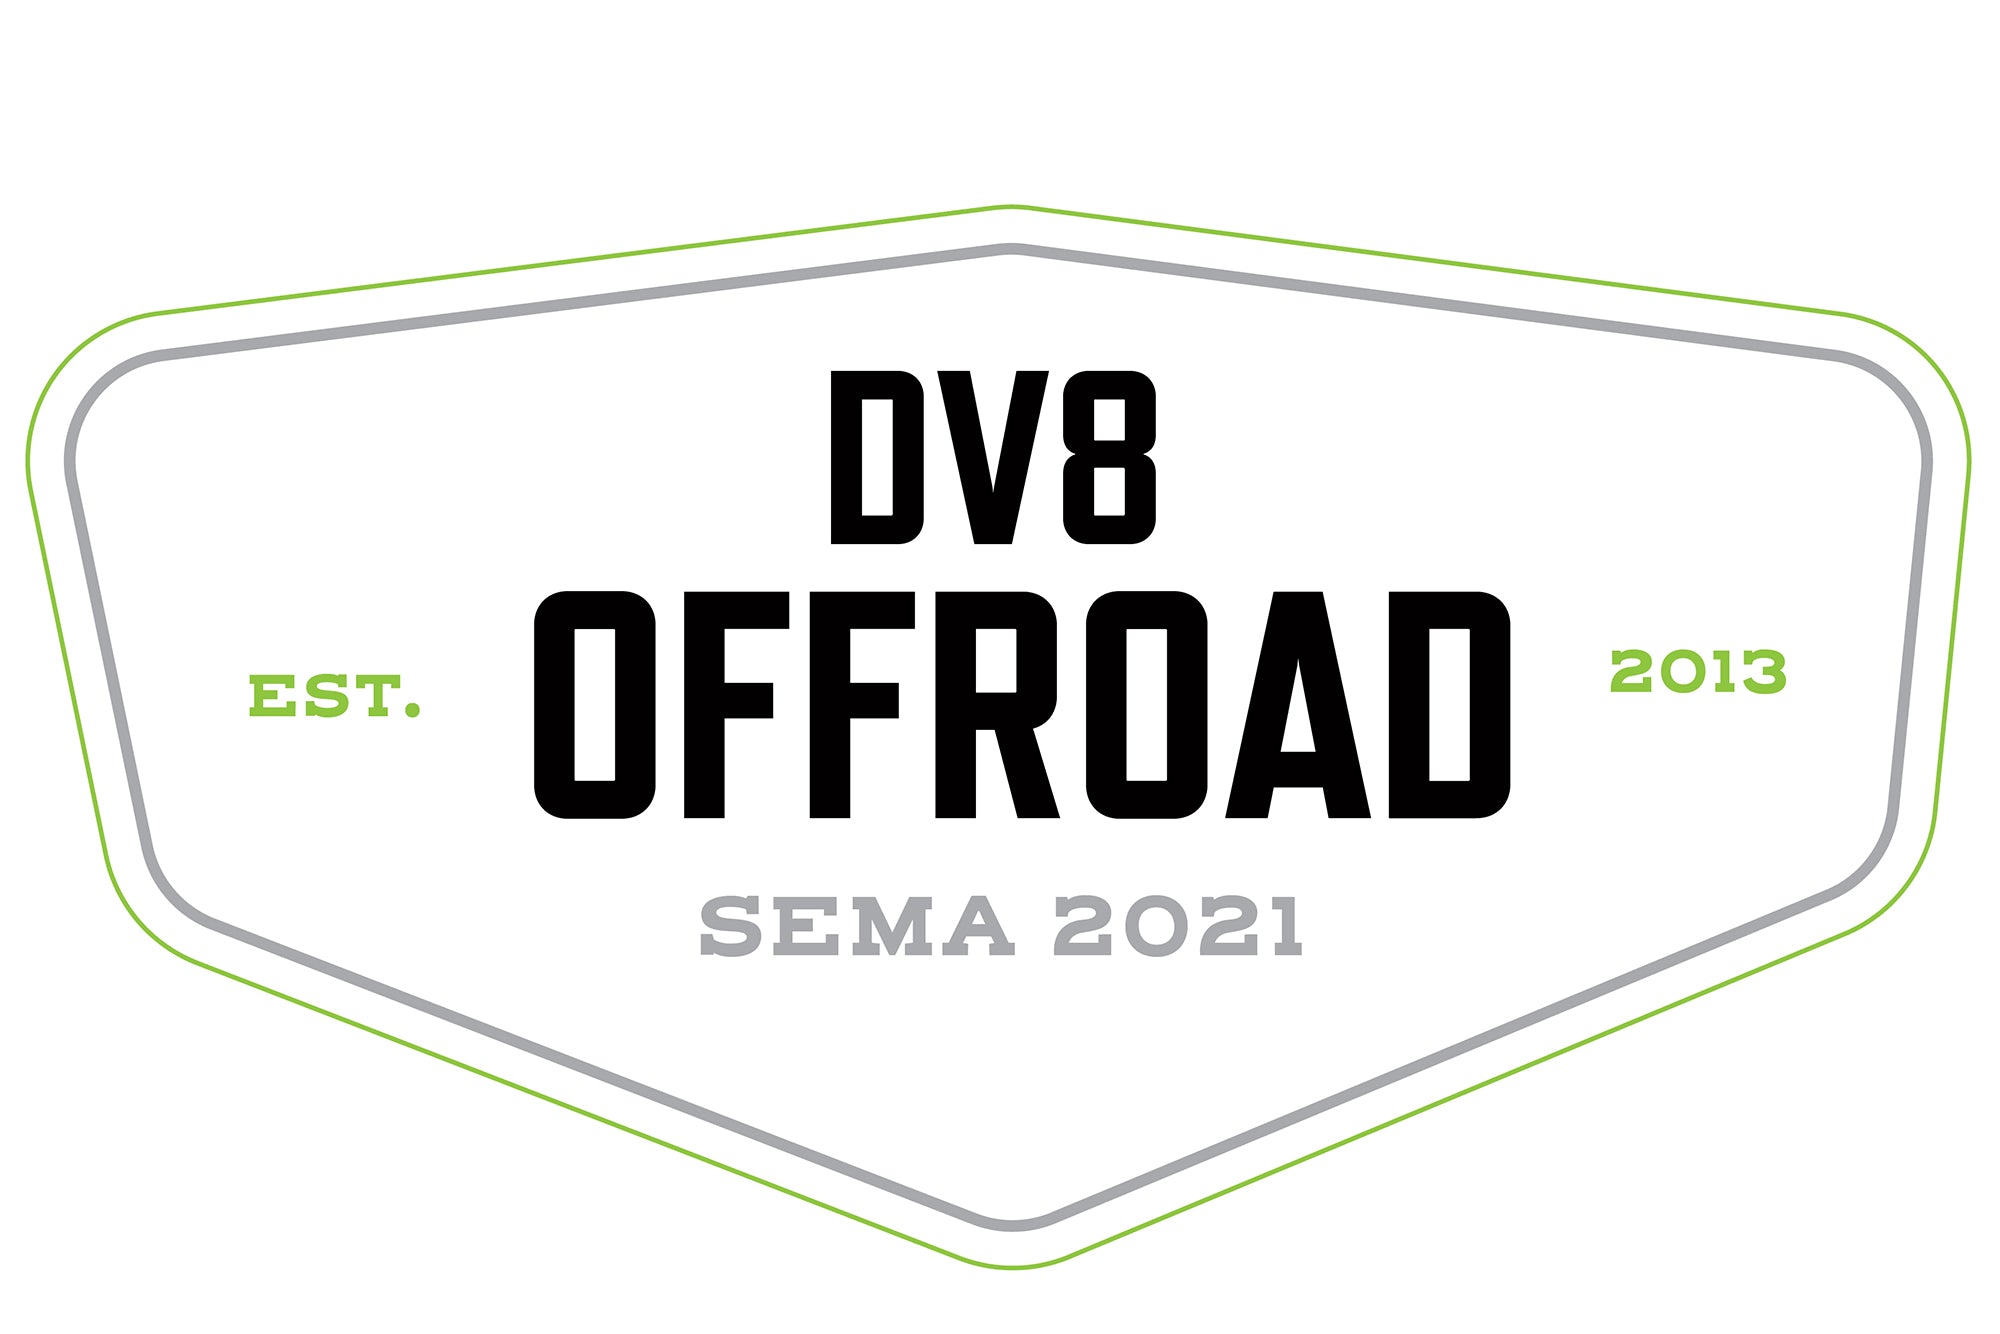 DV8 Offroad is Getting Ready for SEMA 2021